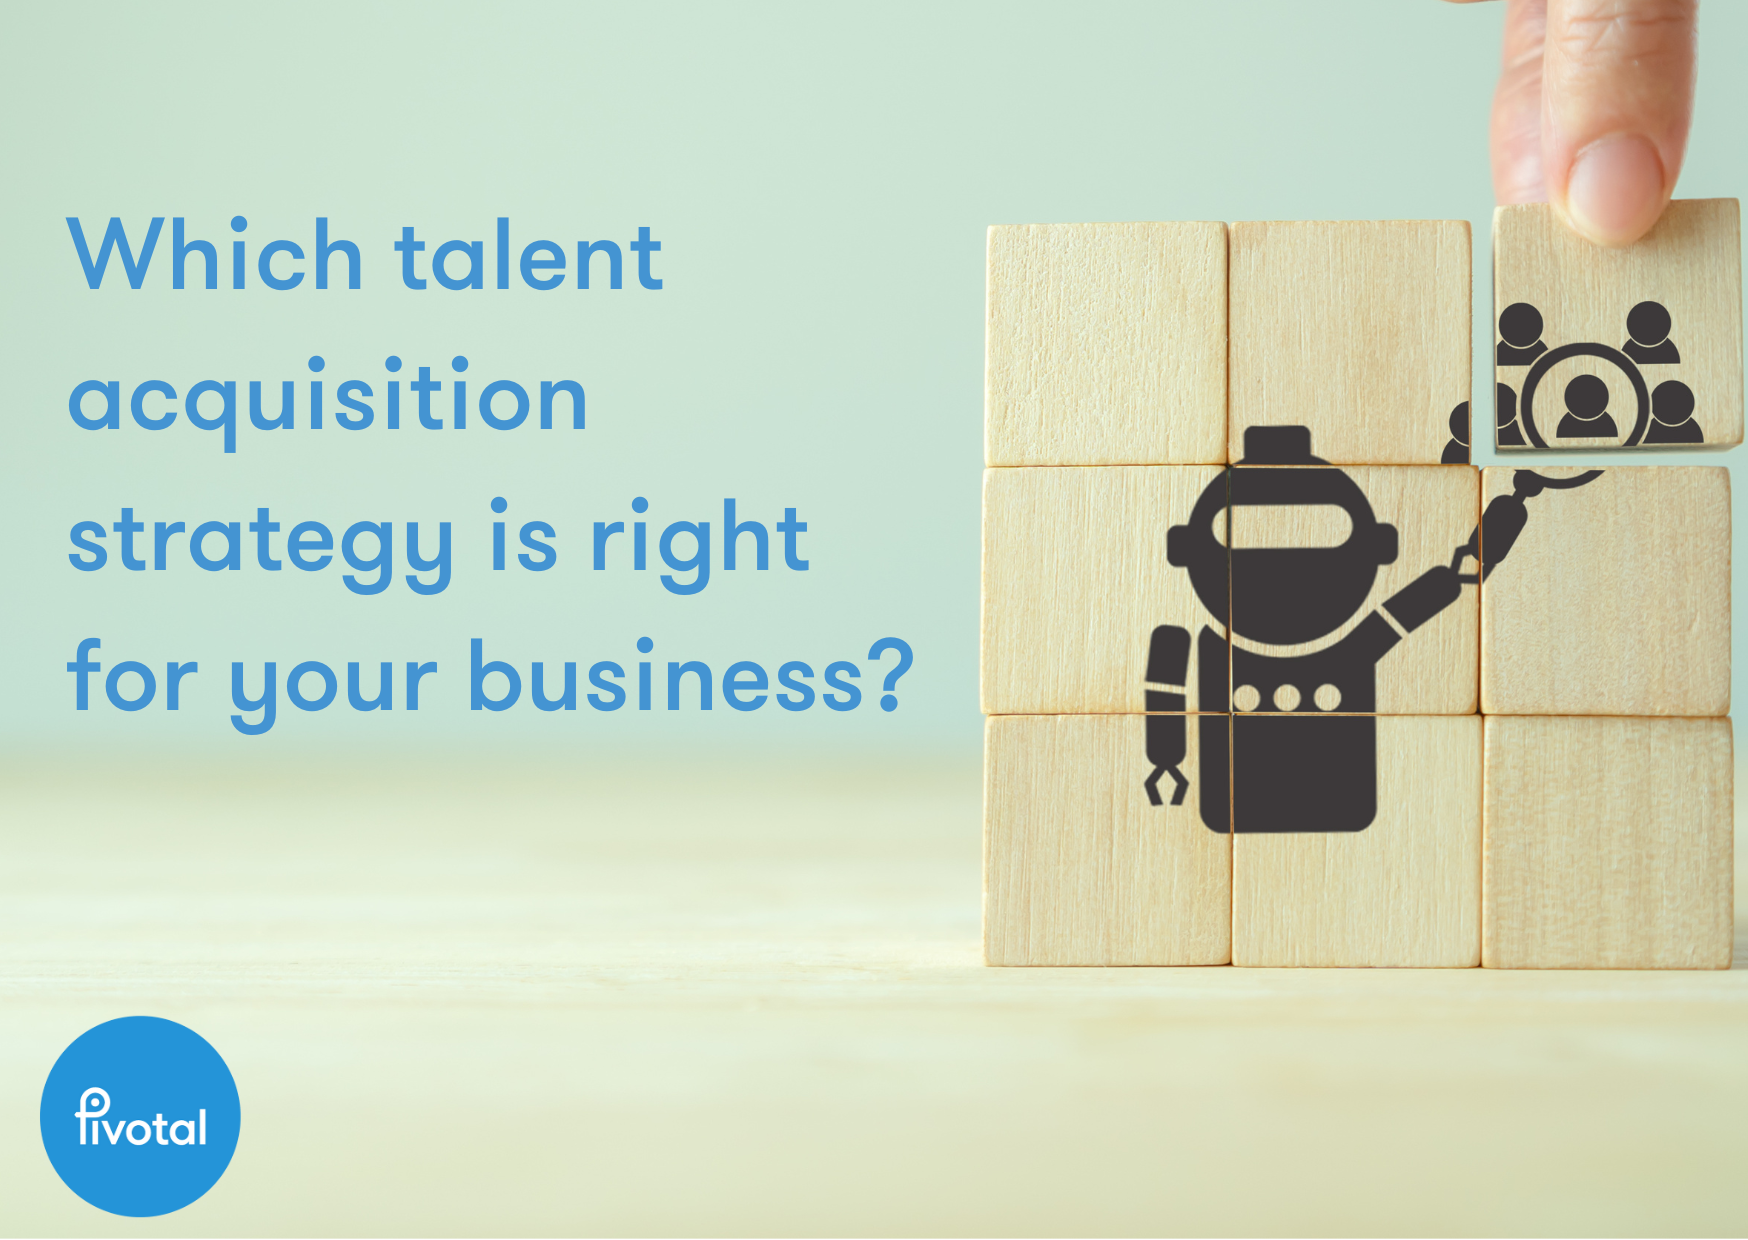 Which talent acquisition strategy is right for your business?